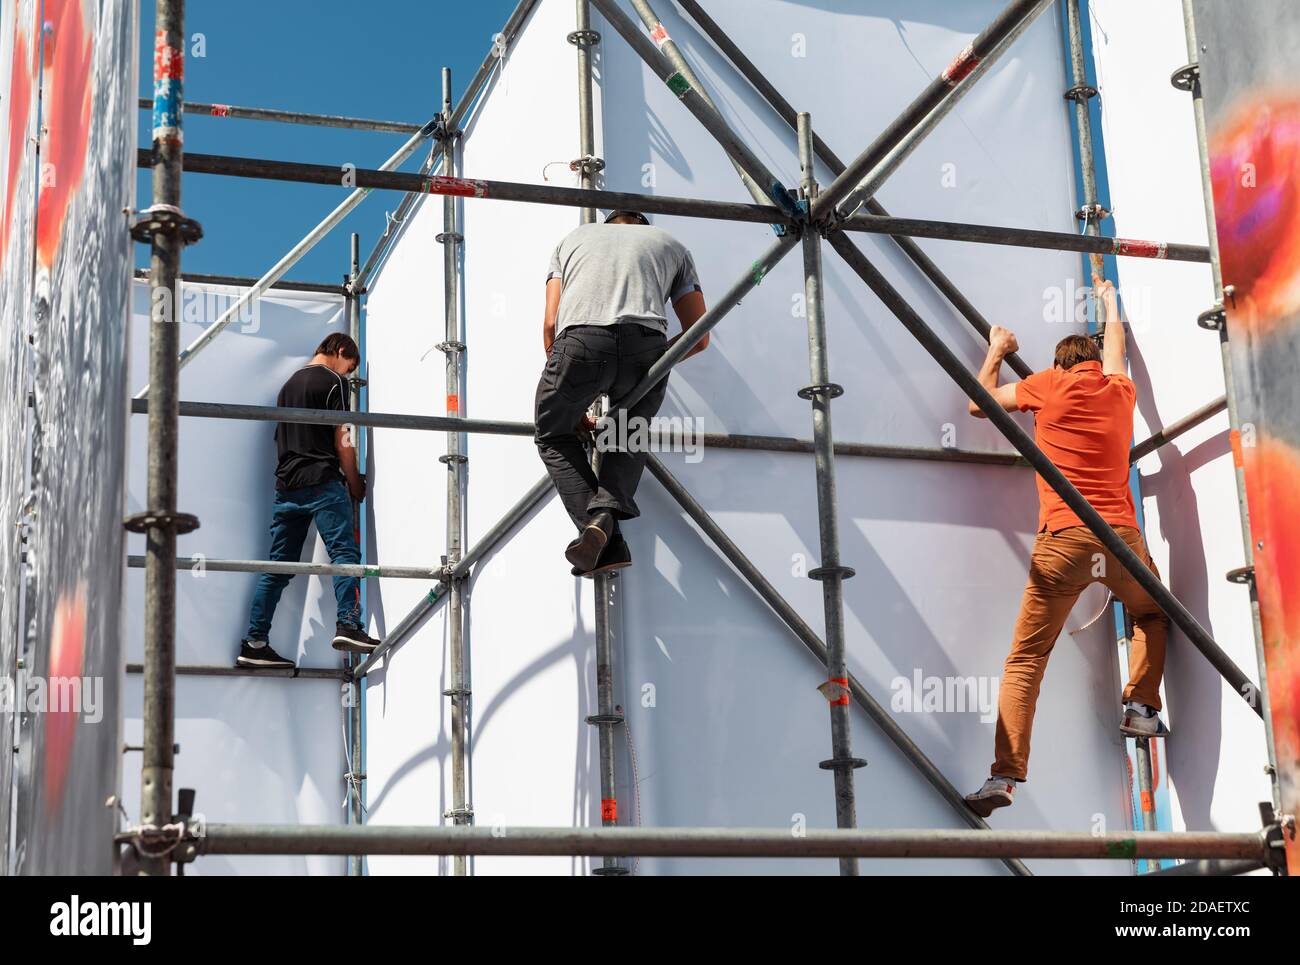 KYIV, UKRAINE - May 05, 2017: Worker prepares billboard to installing new advertisement on the Independence Square in Kyiv Stock Photo